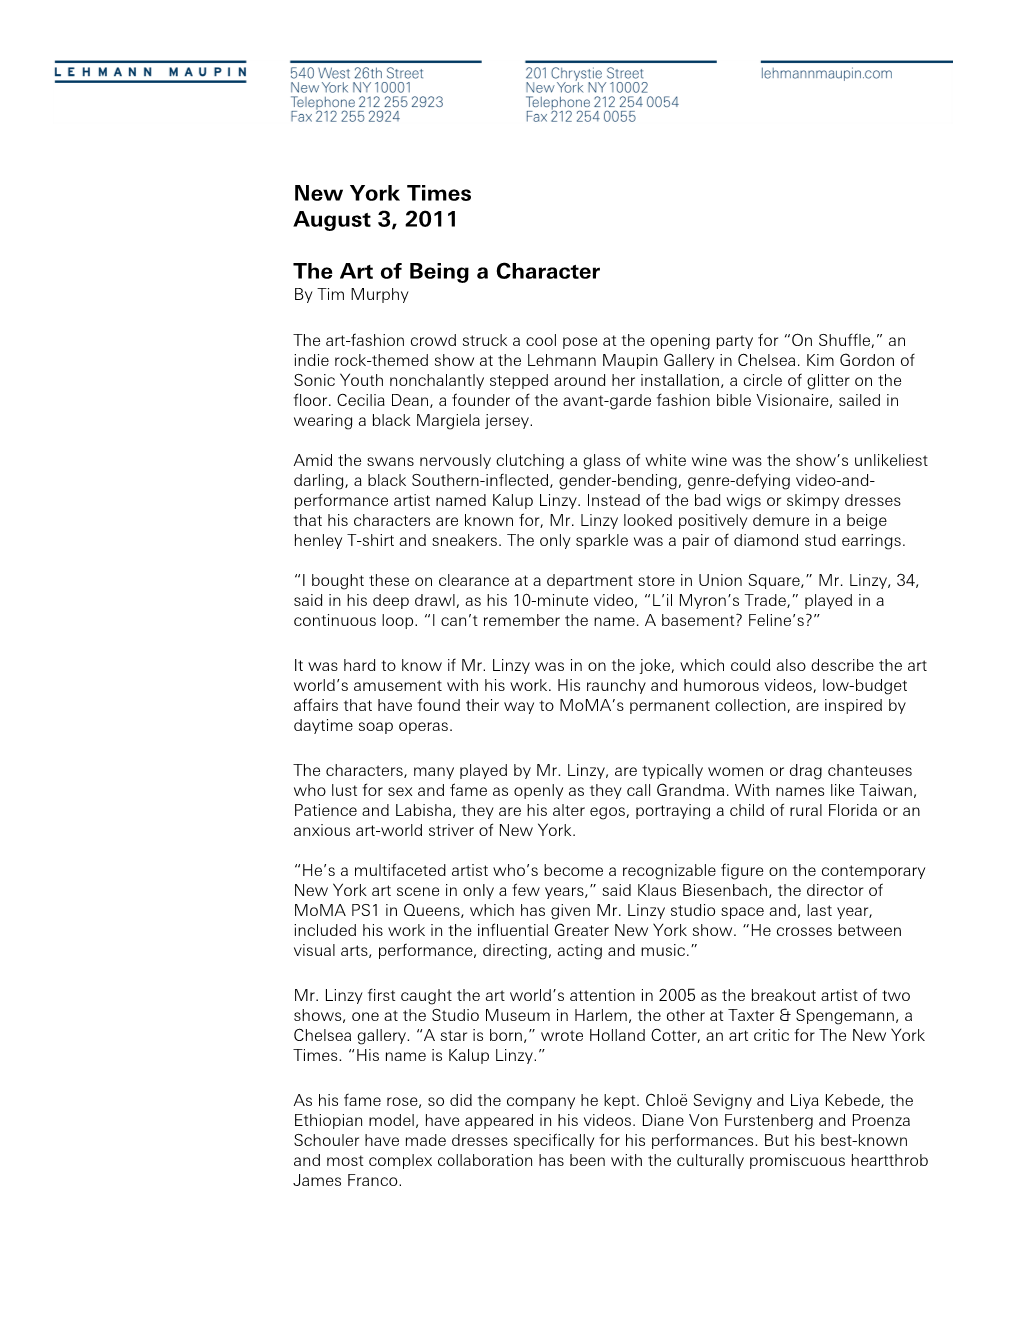 New York Times August 3, 2011 the Art of Being a Character